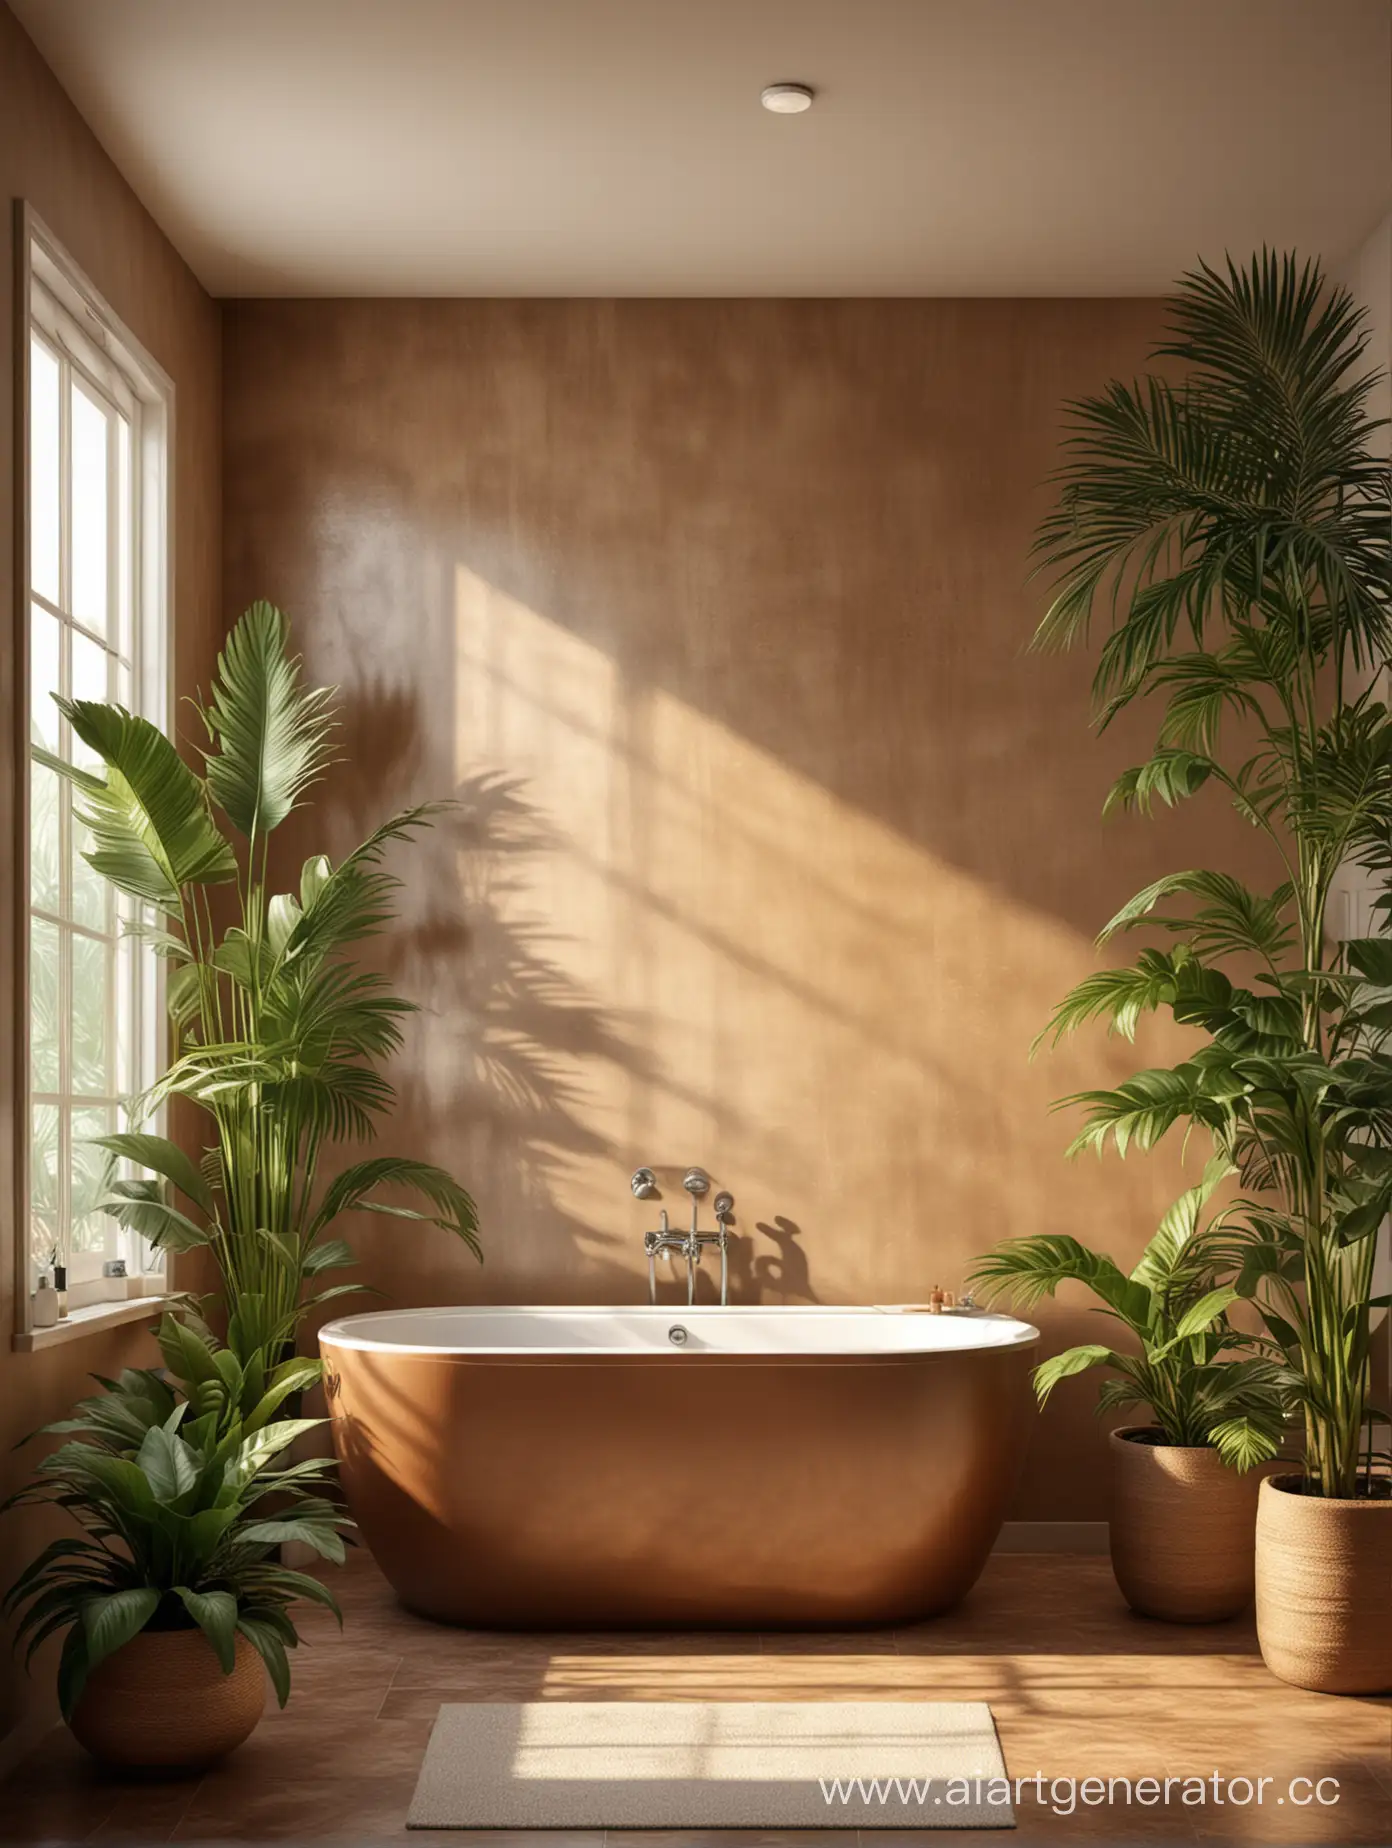 Realistic-Brown-Bathroom-with-Tropical-Plants-Bathed-in-Sunlight